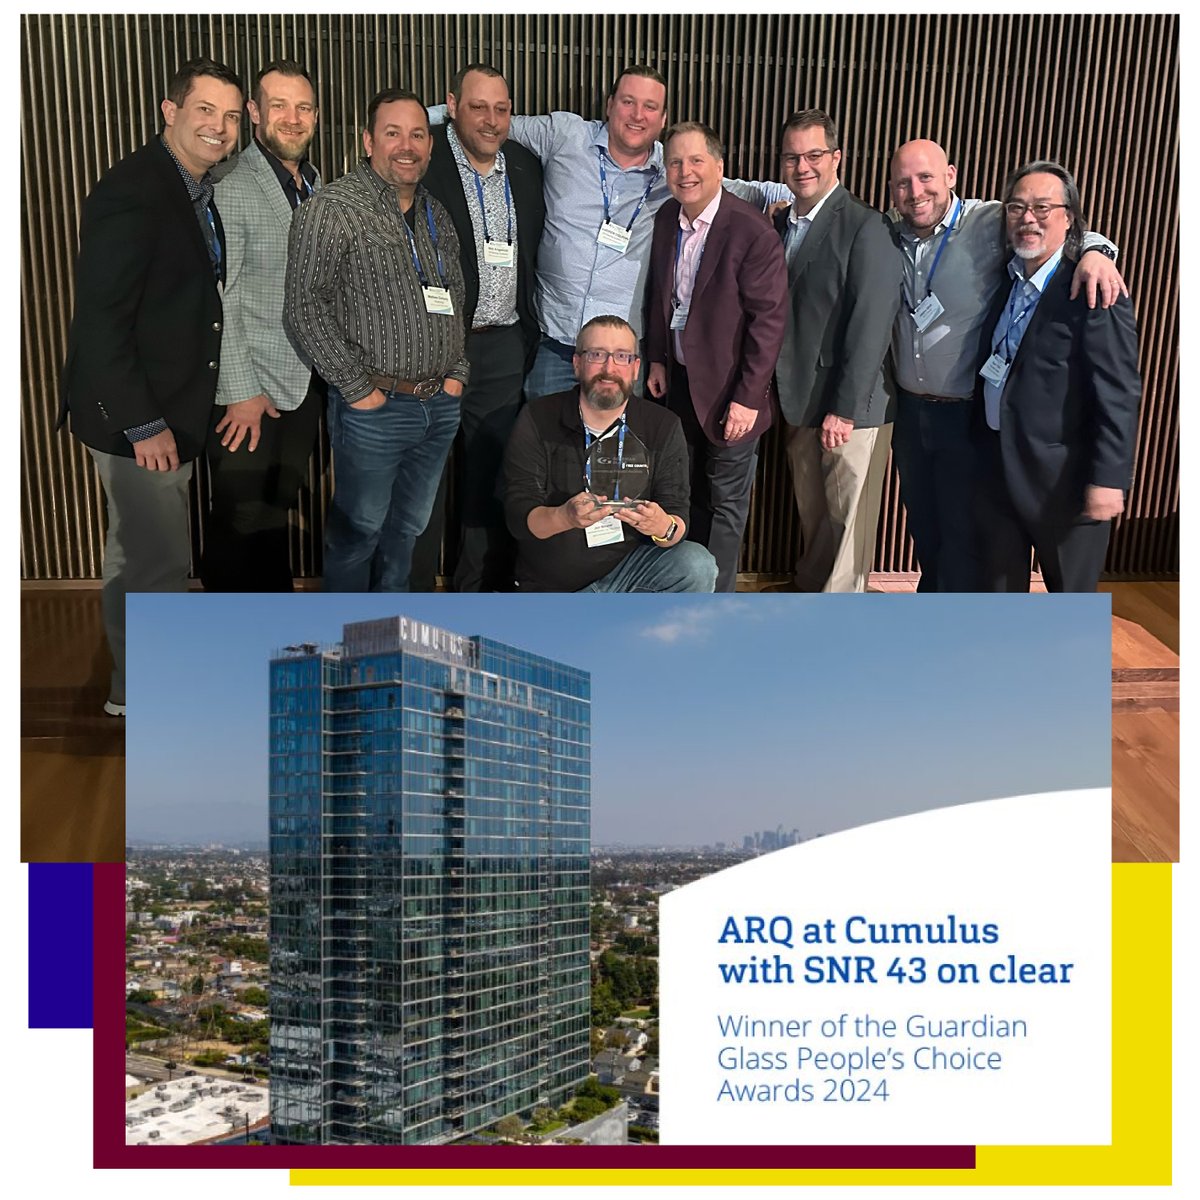 Congratulations to Guardian Glass People's Choice Award winner ARQ at Cumulus in L.A. Great work from our Quest, SLS, & WIS teams, as well as everyone else involved. Thanks to those who helped celebrate the win with us on stage, including our partners at BV Glazing Systems.